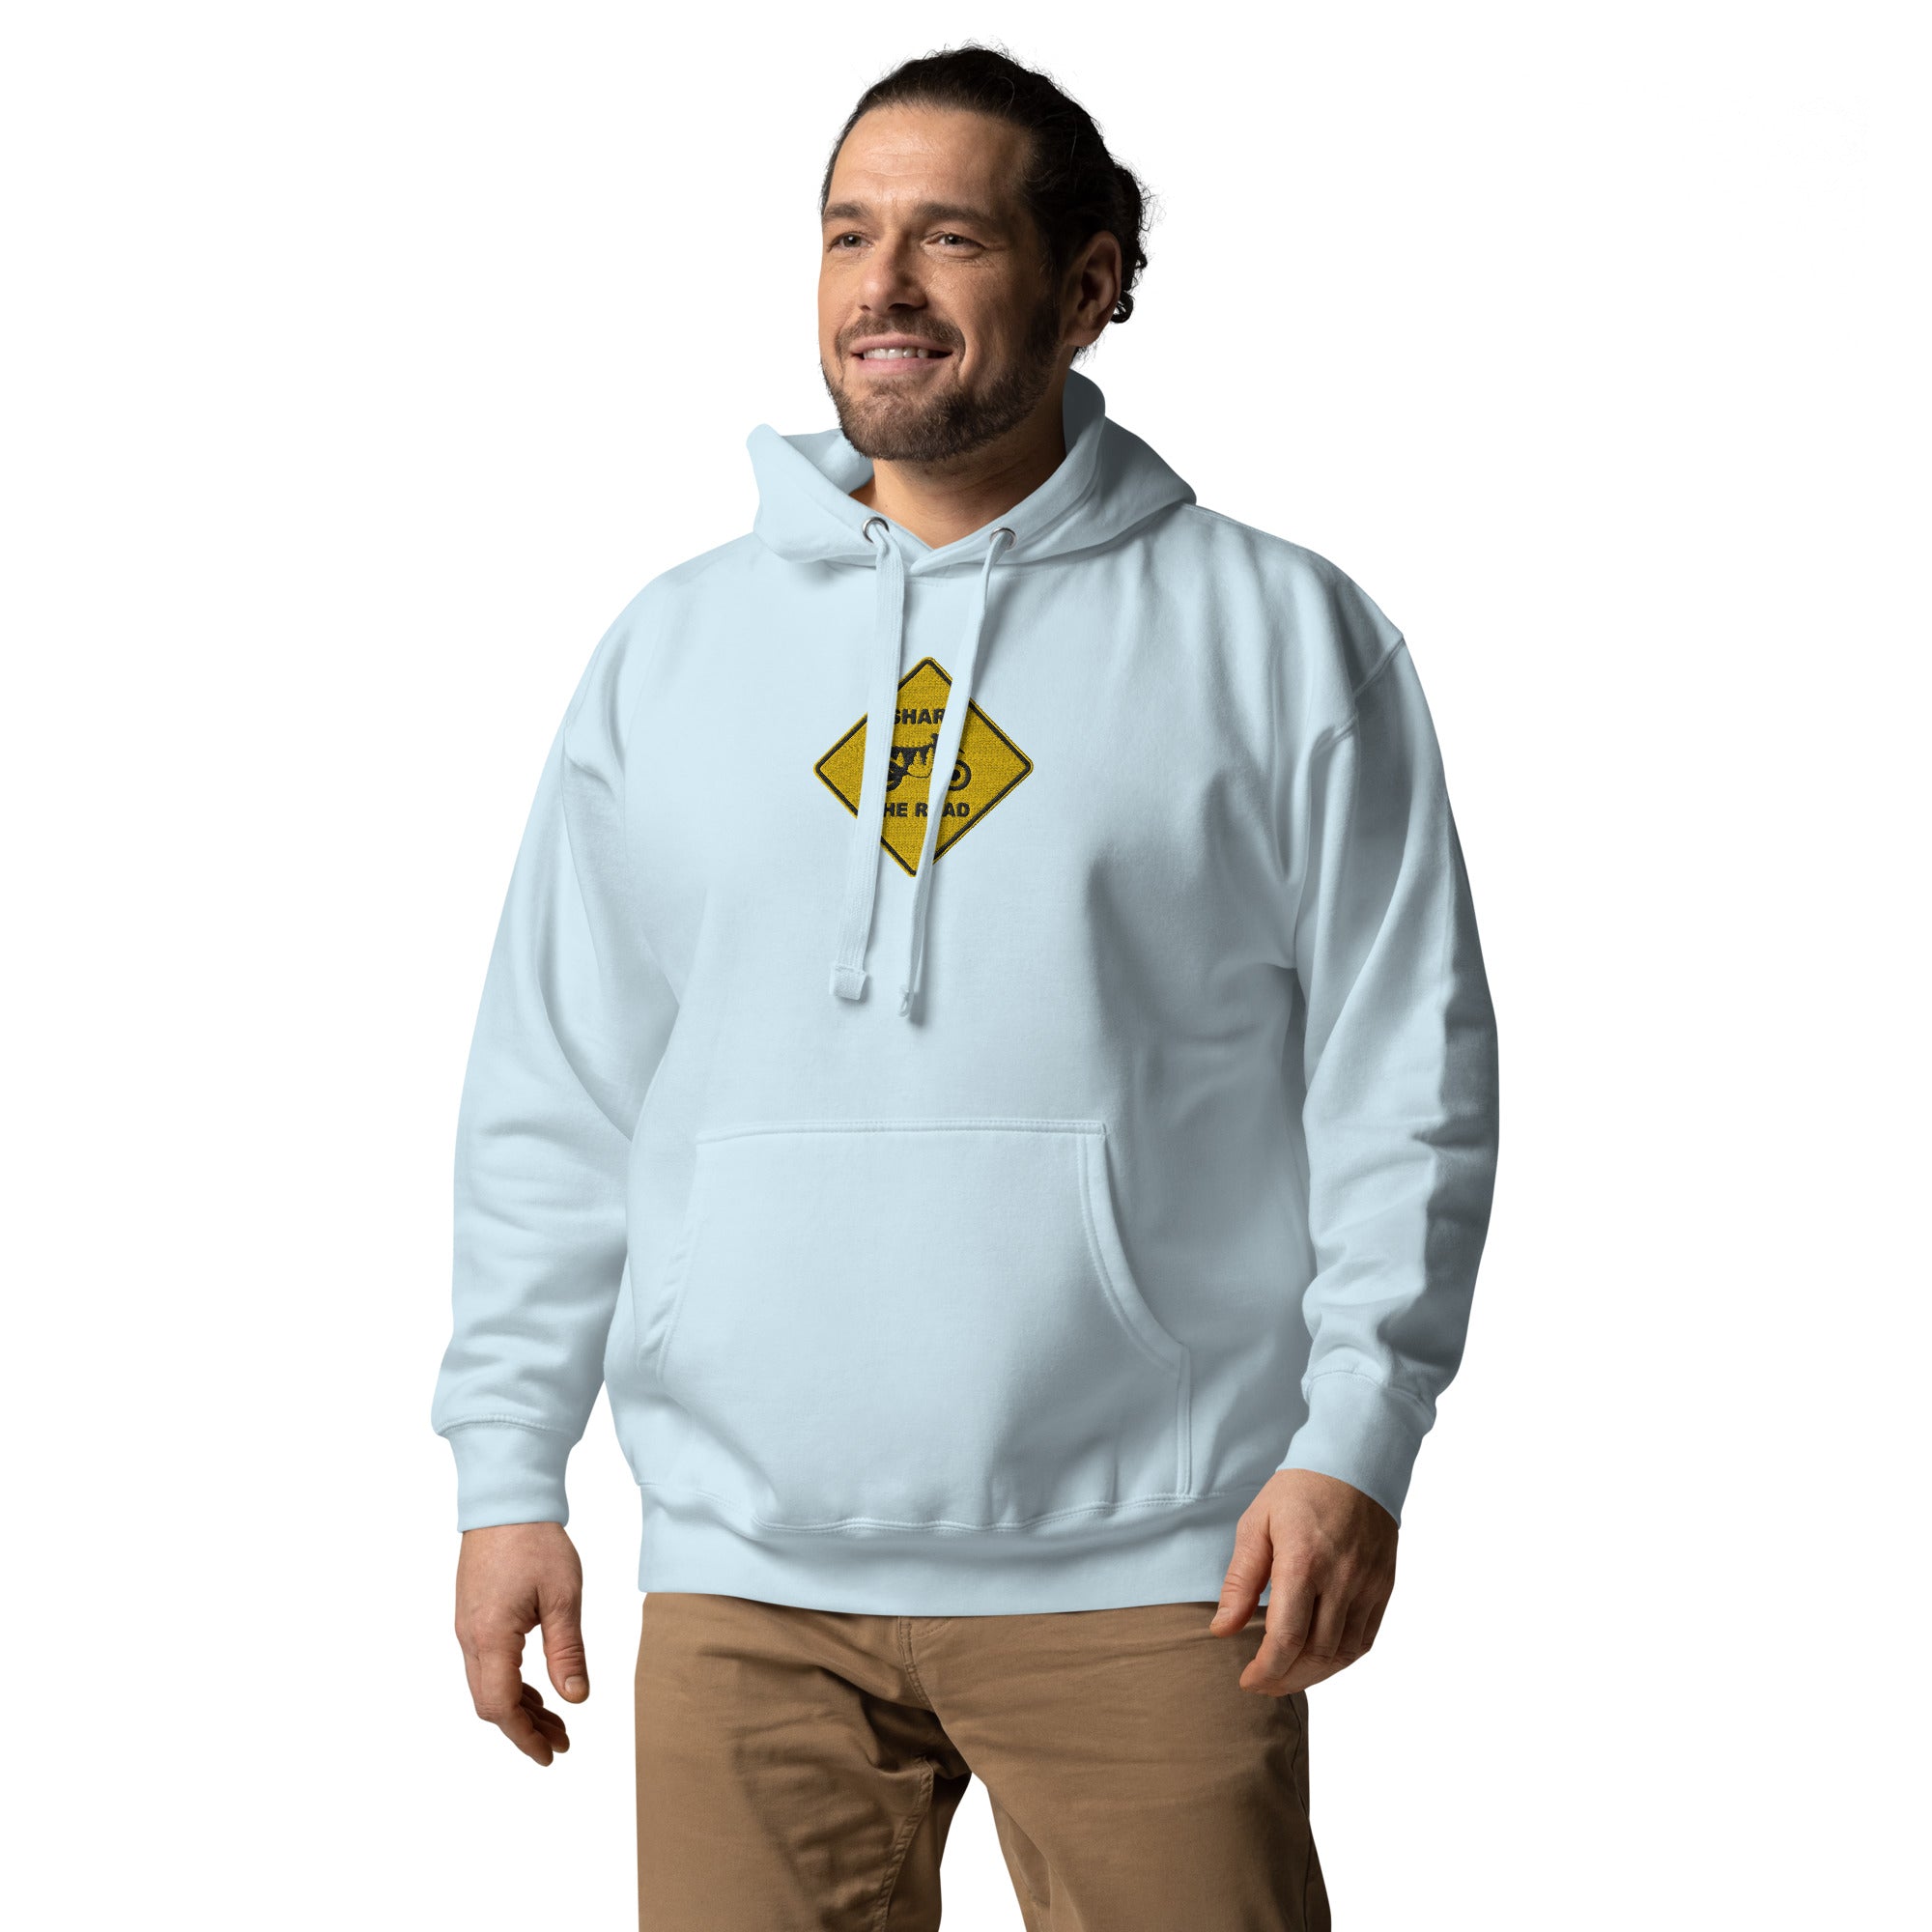 Share The Road Hoodie, Embroidered